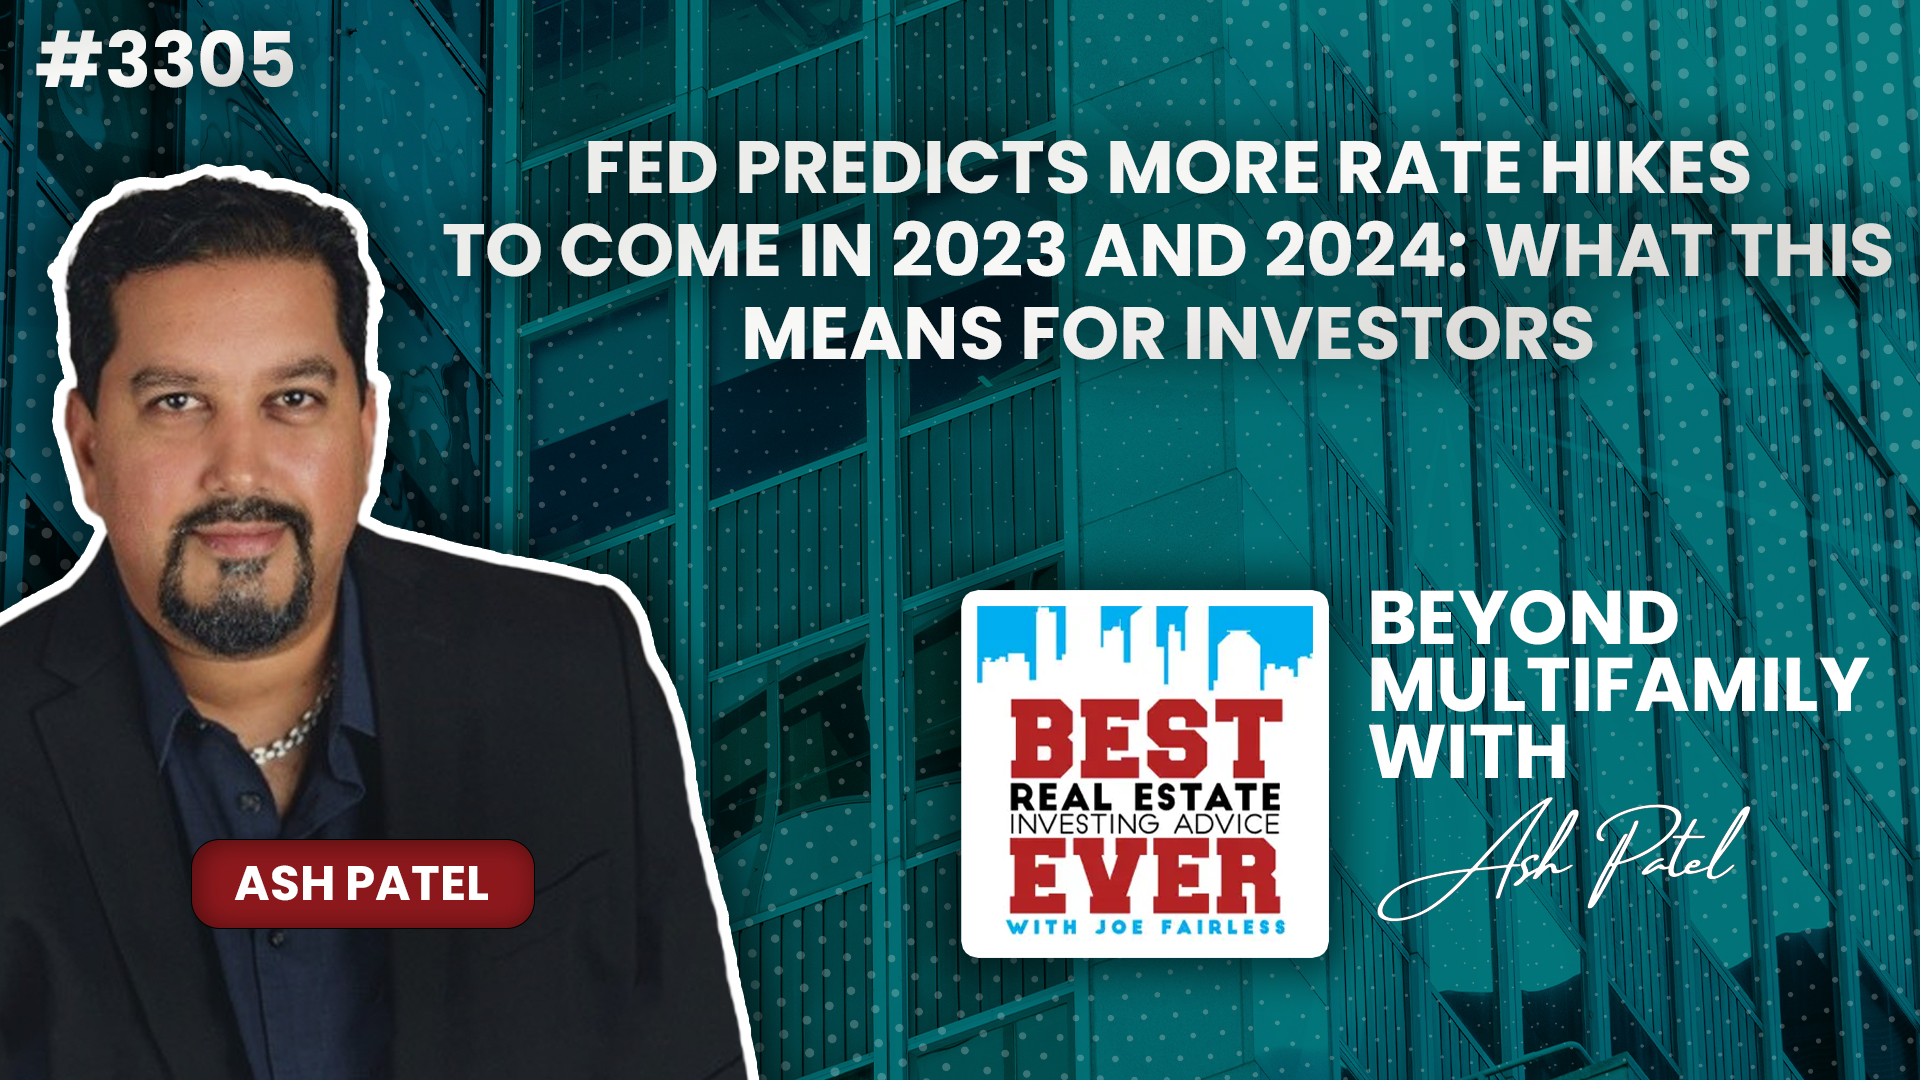 JF3305: Fed Predicts More Rate Hikes to Come in 2023 and 2024: What This Means for Investors | Beyond Multifamily ft. Ash Patel